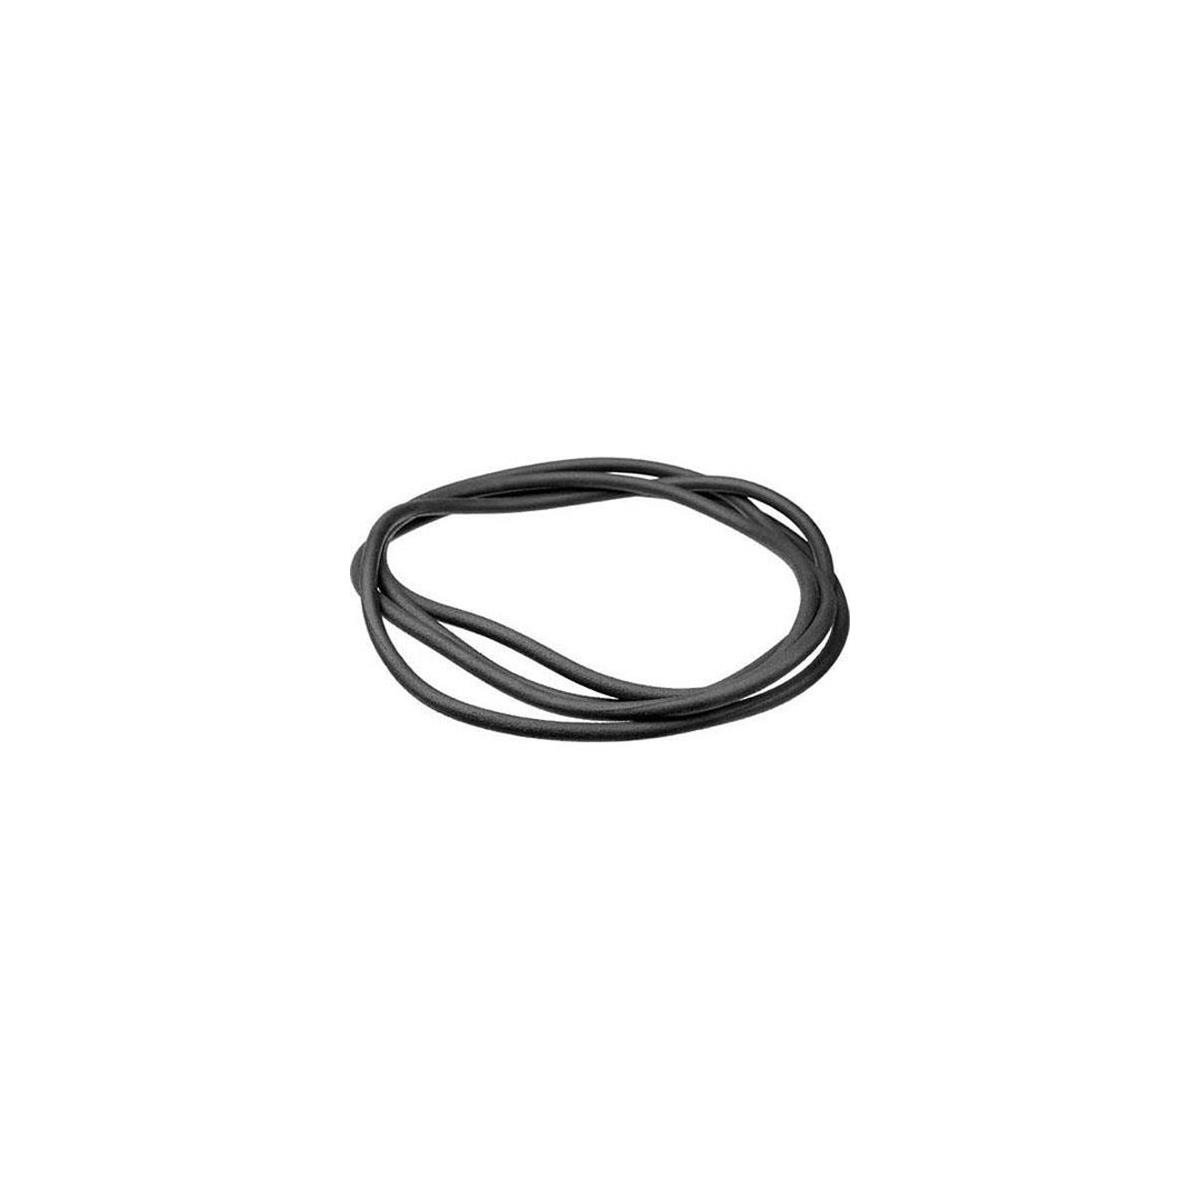 Image of Pelican Replacement O-Ring for Pelican 1095 Case